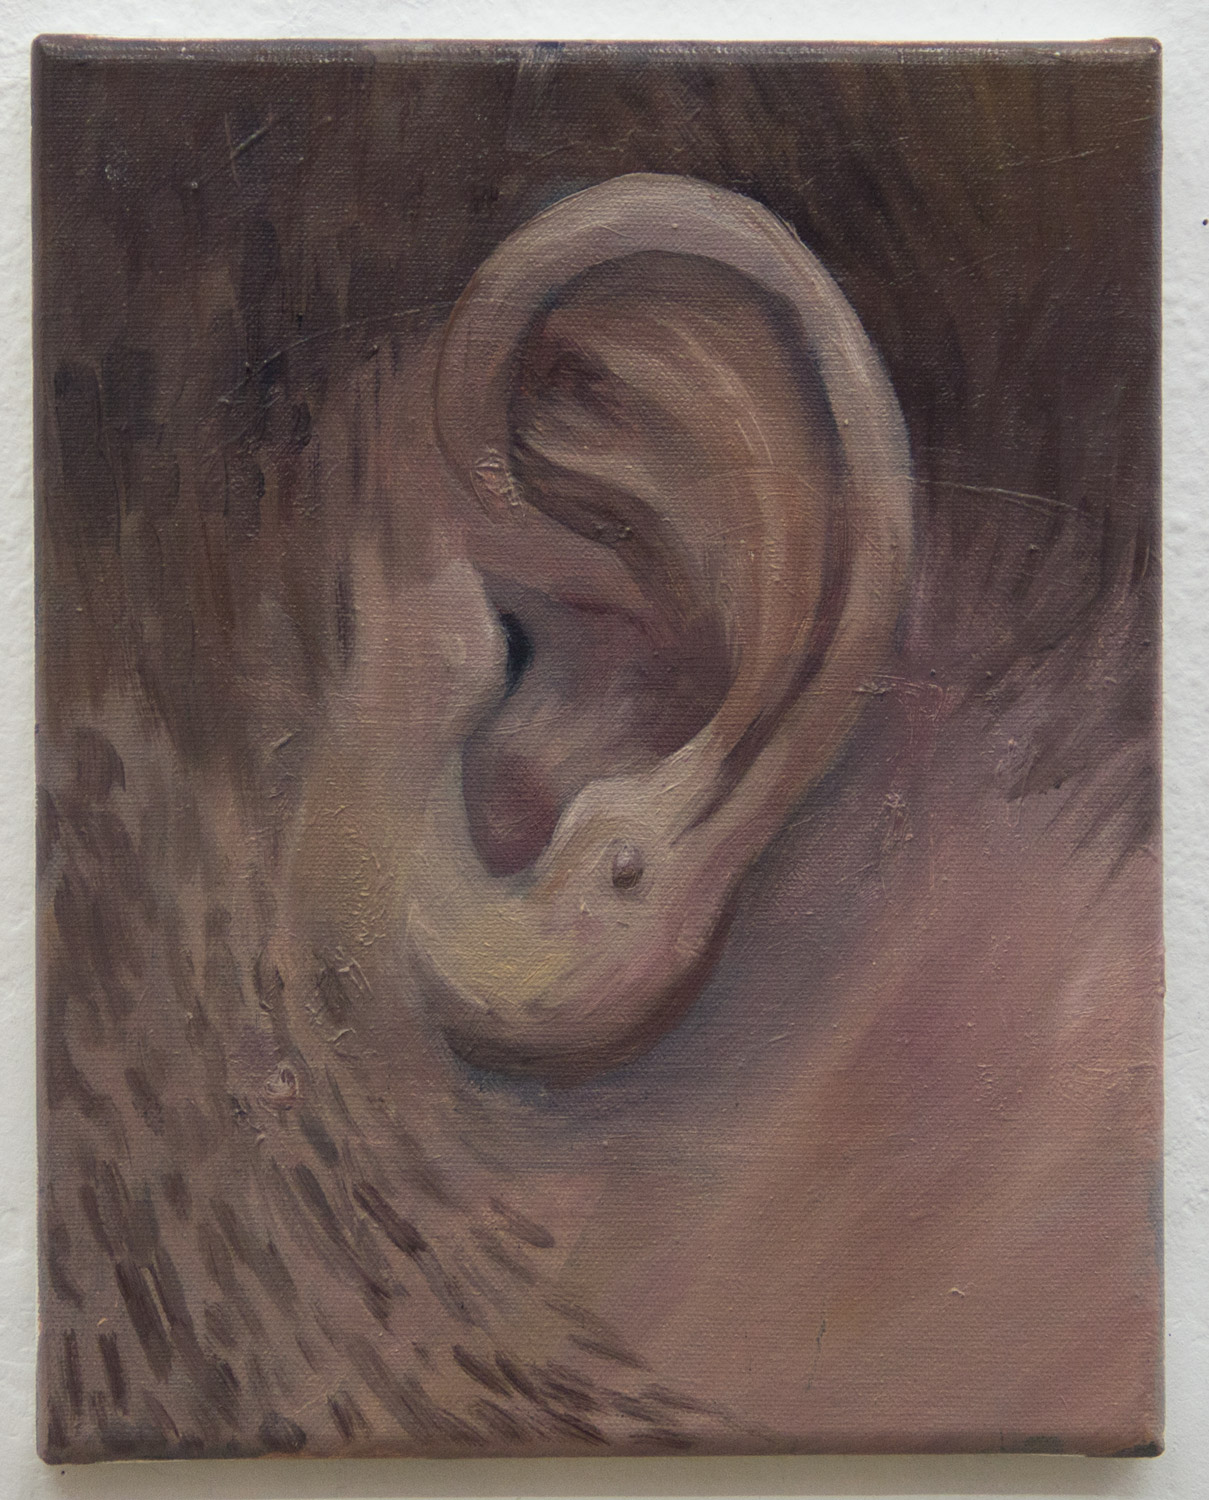 From the "Ear Collection"; 24 x 30 cm; oil on canvas; 2019